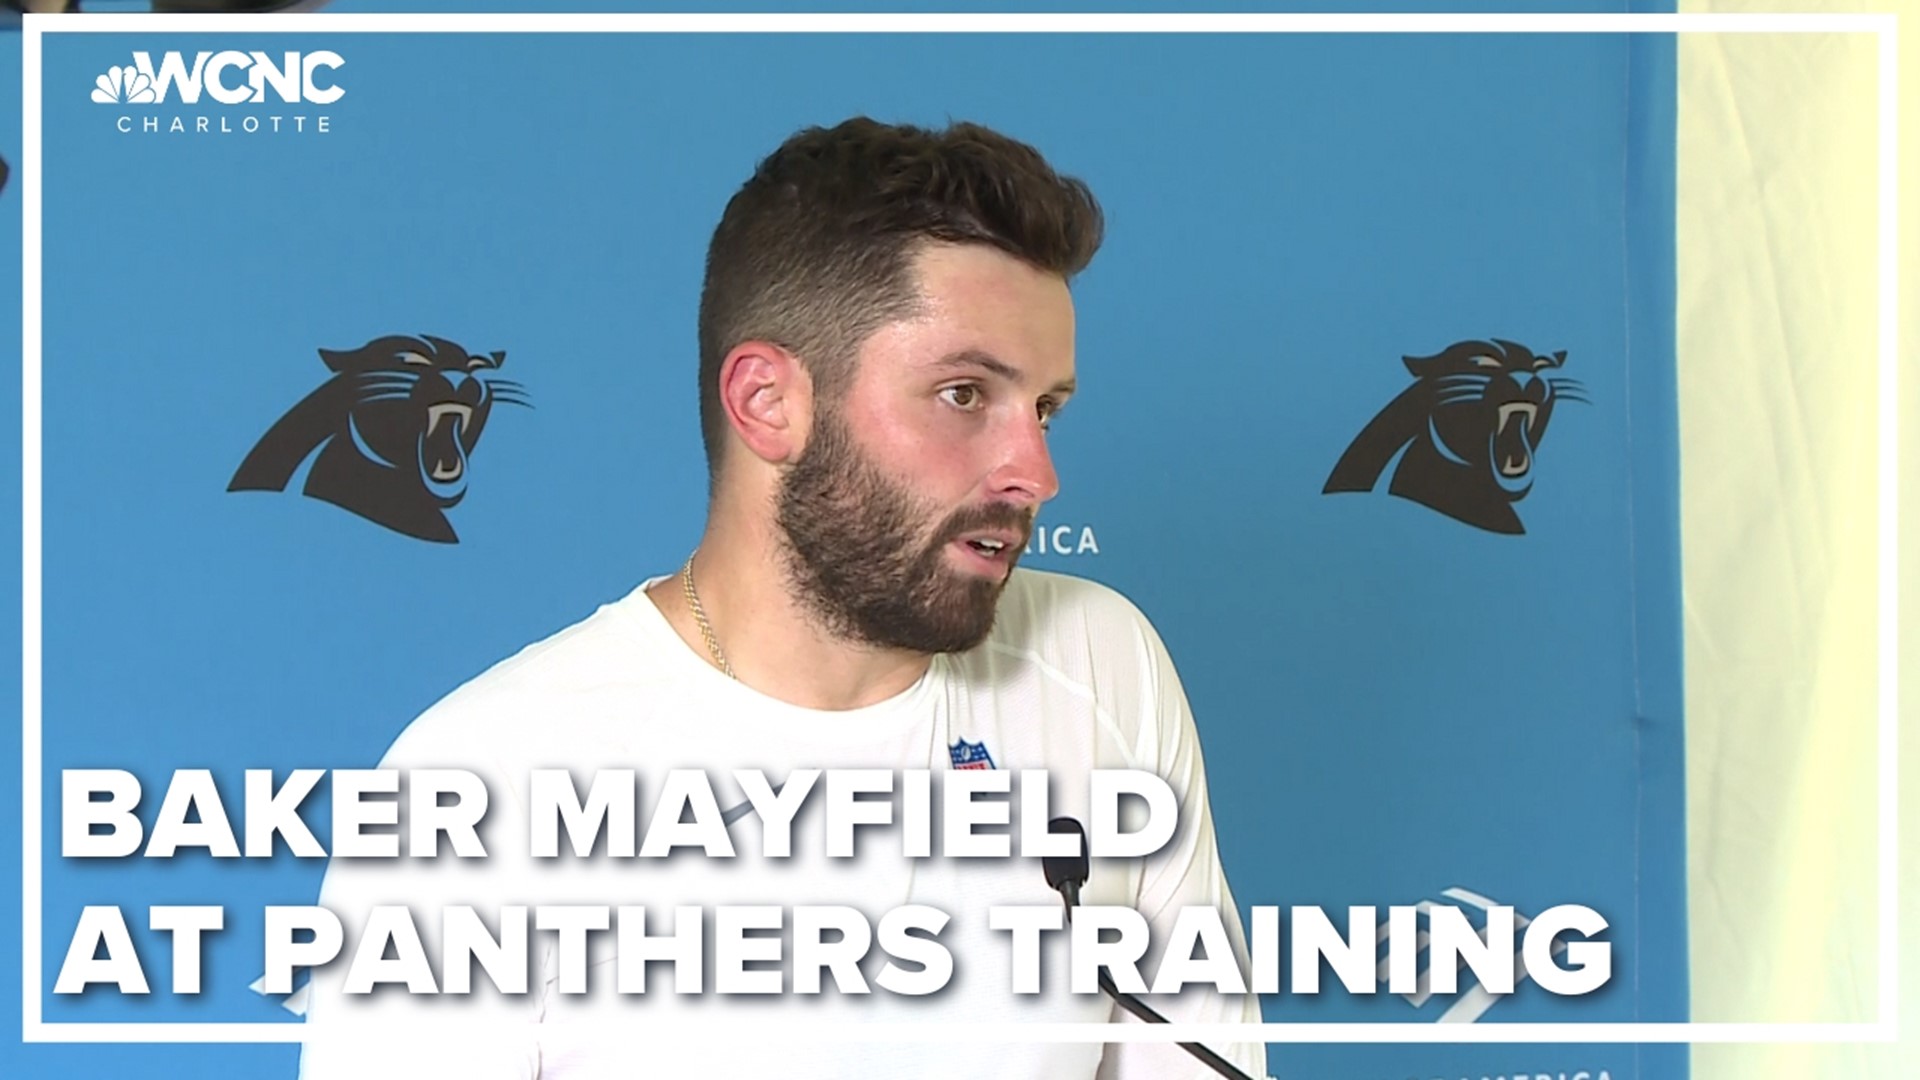 Quarterback Baker Mayfield updates reporters on the progress of the Carolina Panthers' training camp in Spartanburg, South Carolina.